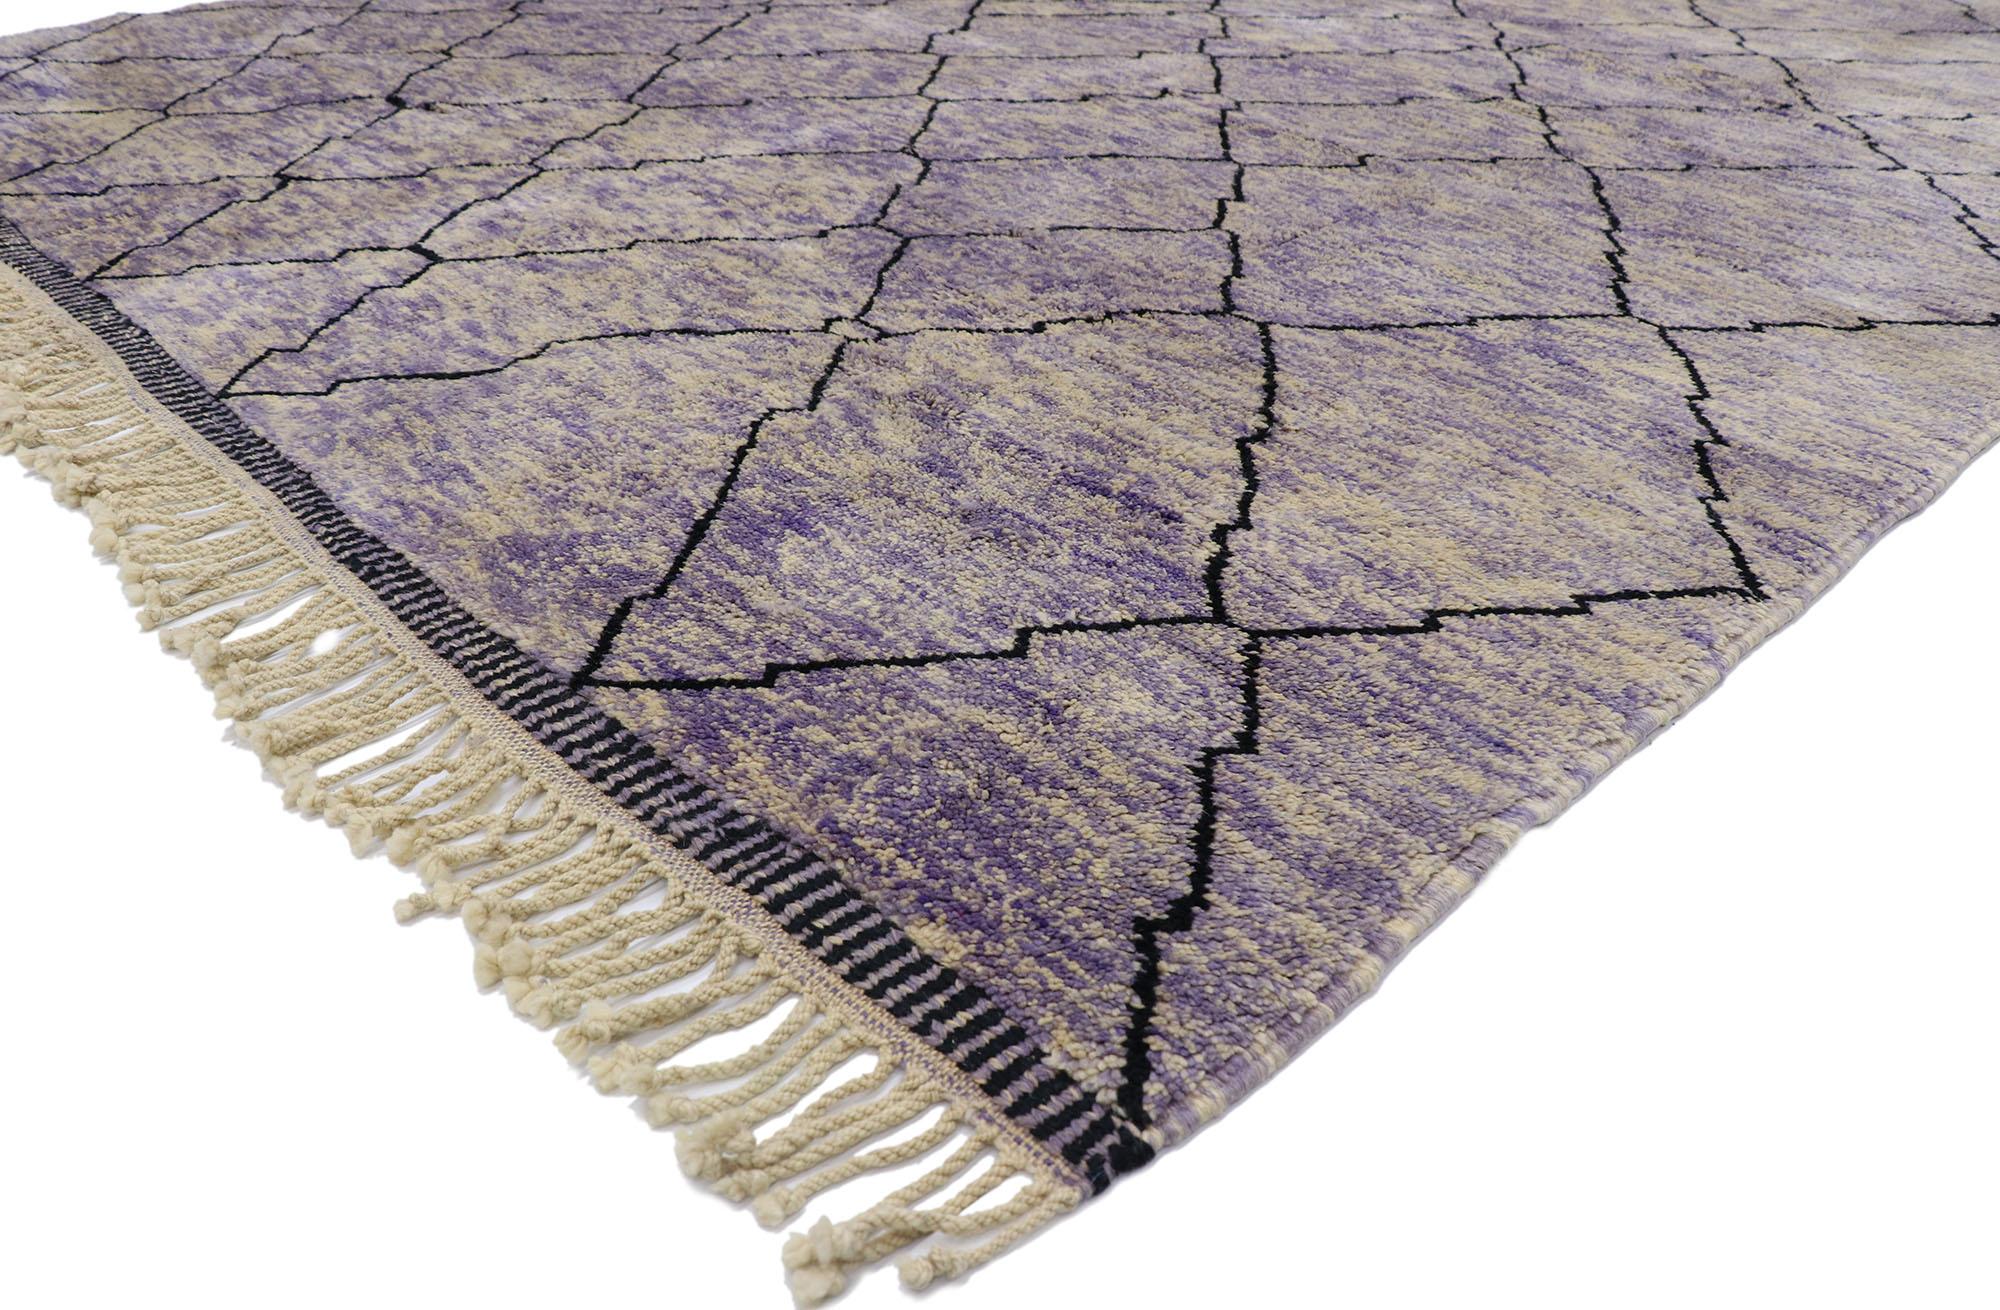 21177, new Contemporary Berber Moroccan rug with Bohemian style. With its bohemian style and plush pile, this hand knotted wool contemporary Berber Moroccan rug is a captivating vision of woven beauty. The abrashed purple field features black lines